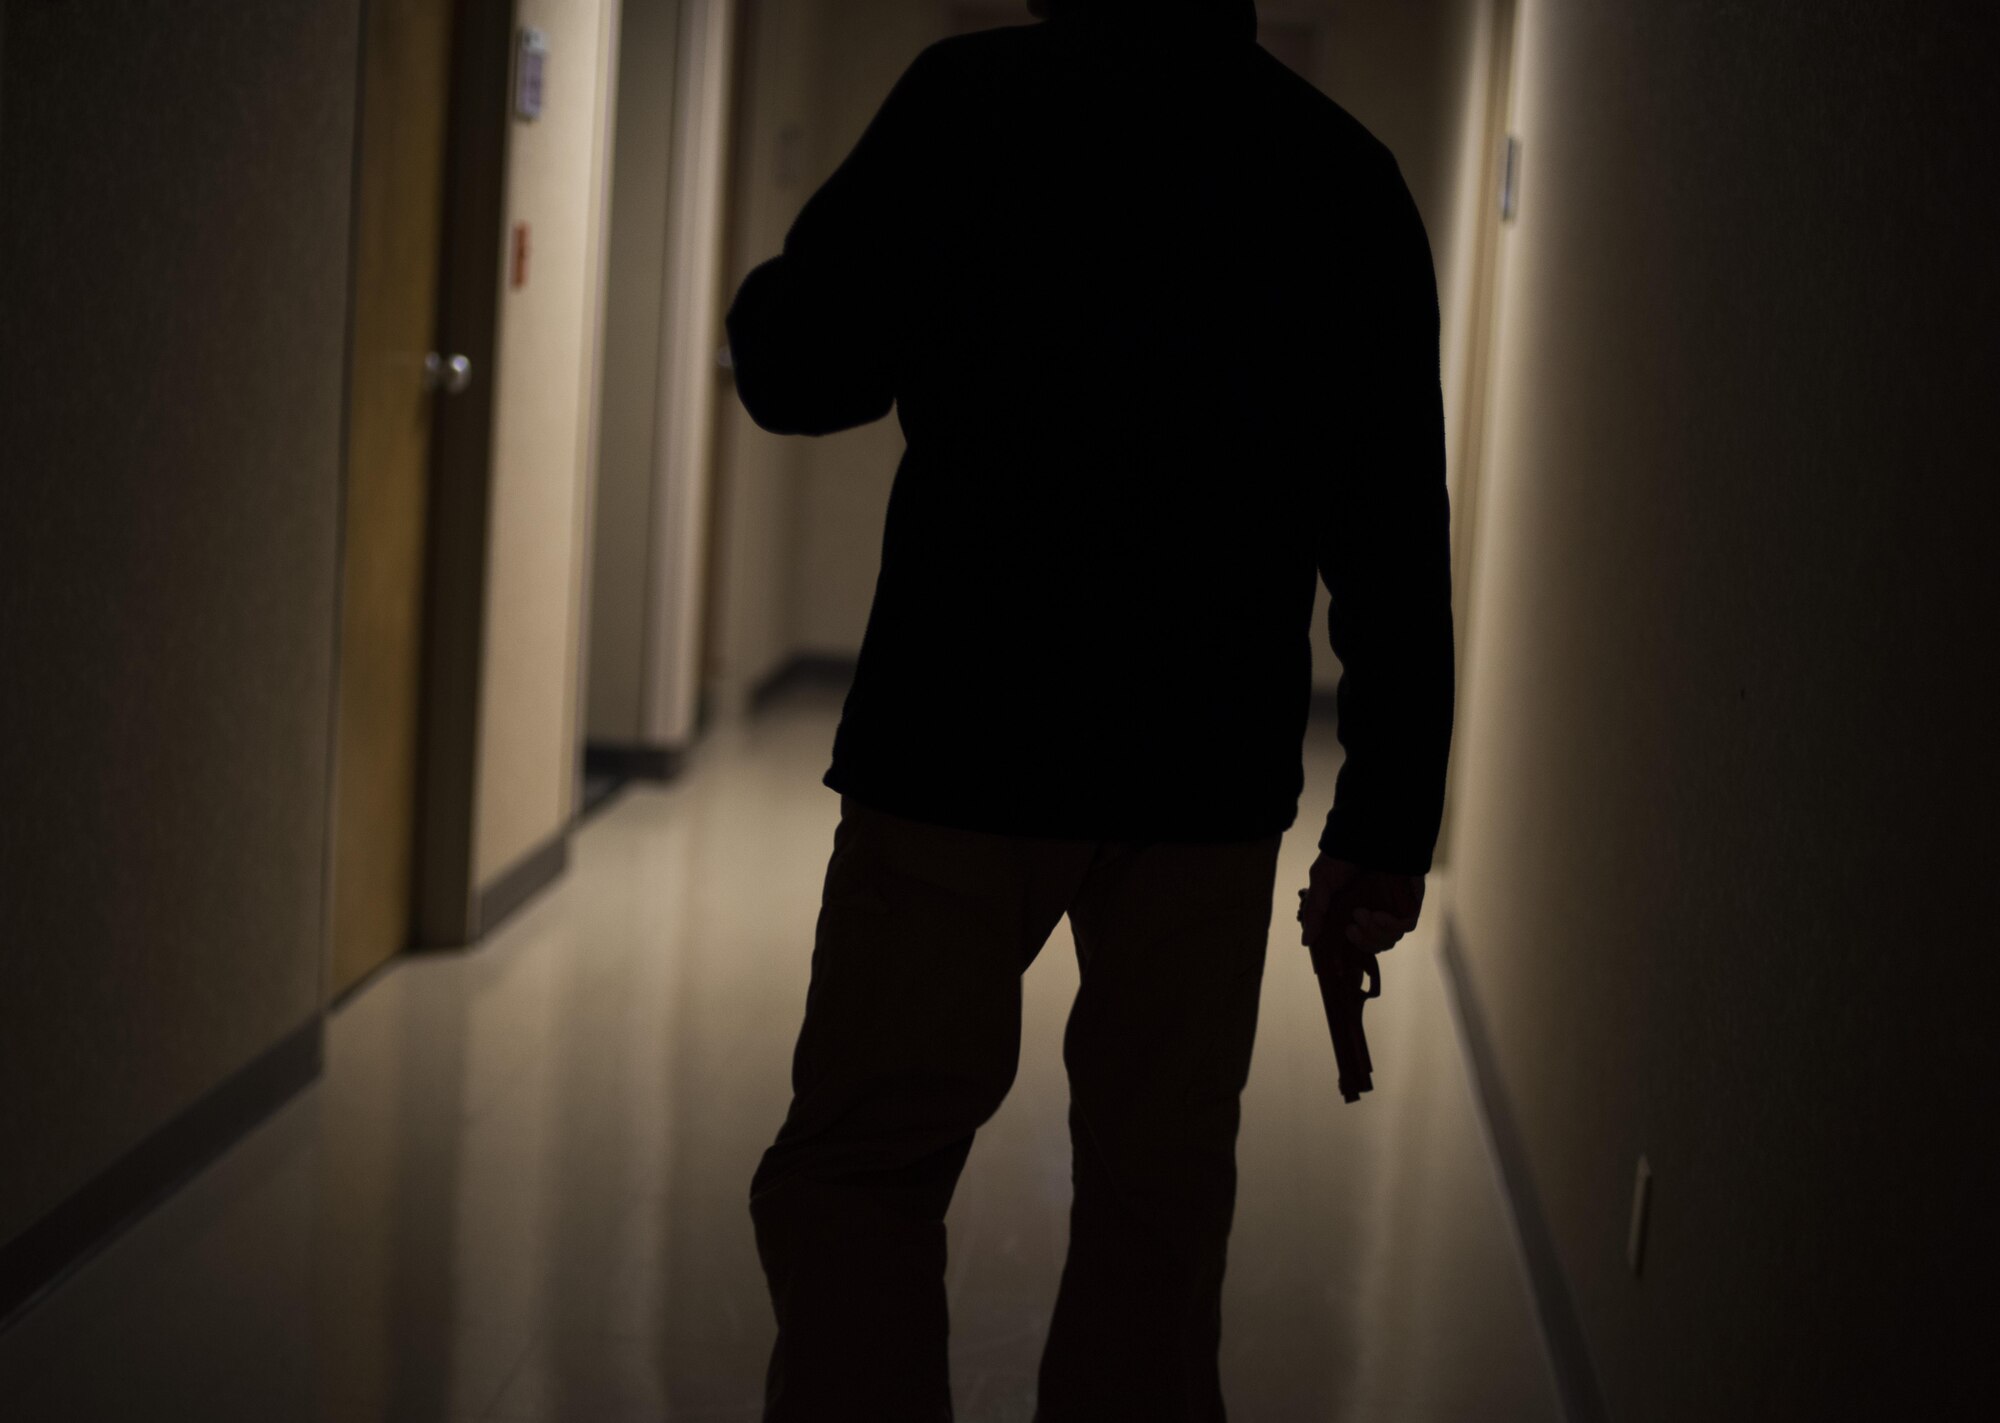 Master Sgt. Jeremy Utphall, 2nd Bomb Wing Inspector General exercise division superintendent, walks down a hallway looking for potential “victims” during an active shooter exercise at Barksdale Air Force Base, La., Nov. 29, 2016. He went throughout the medical building, searching offices for victims. (U.S. Air Force photo/Senior Airman Damon Kasberg)